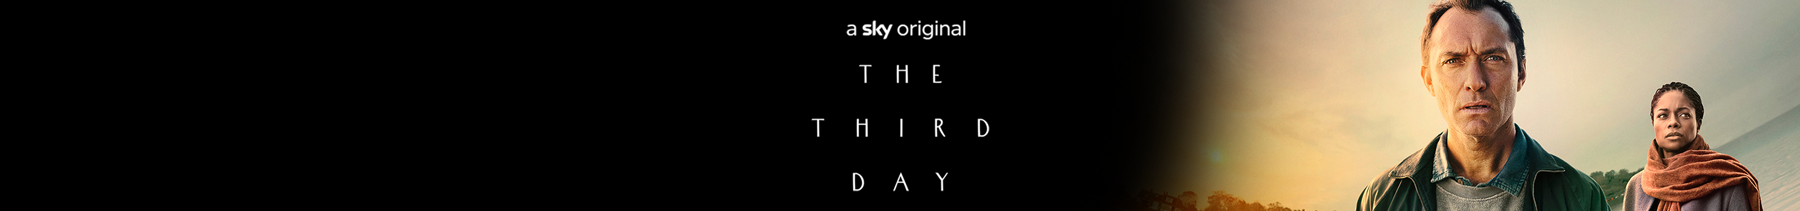 the third day